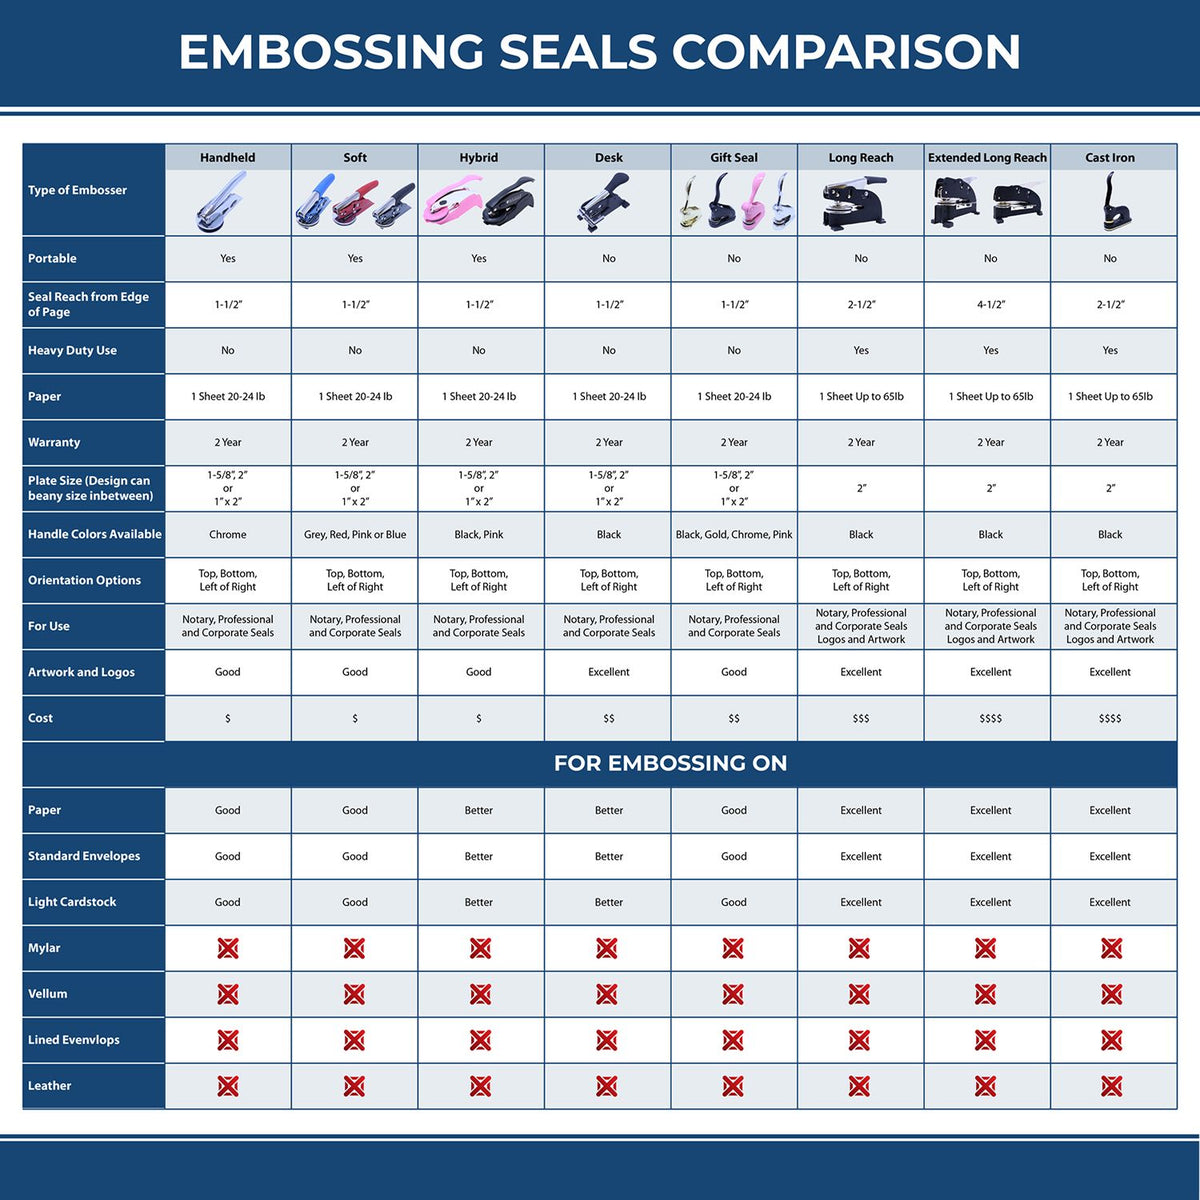 A comparison chart for the different types of mount models available for the Heavy Duty Cast Iron South Carolina Geologist Seal Embosser